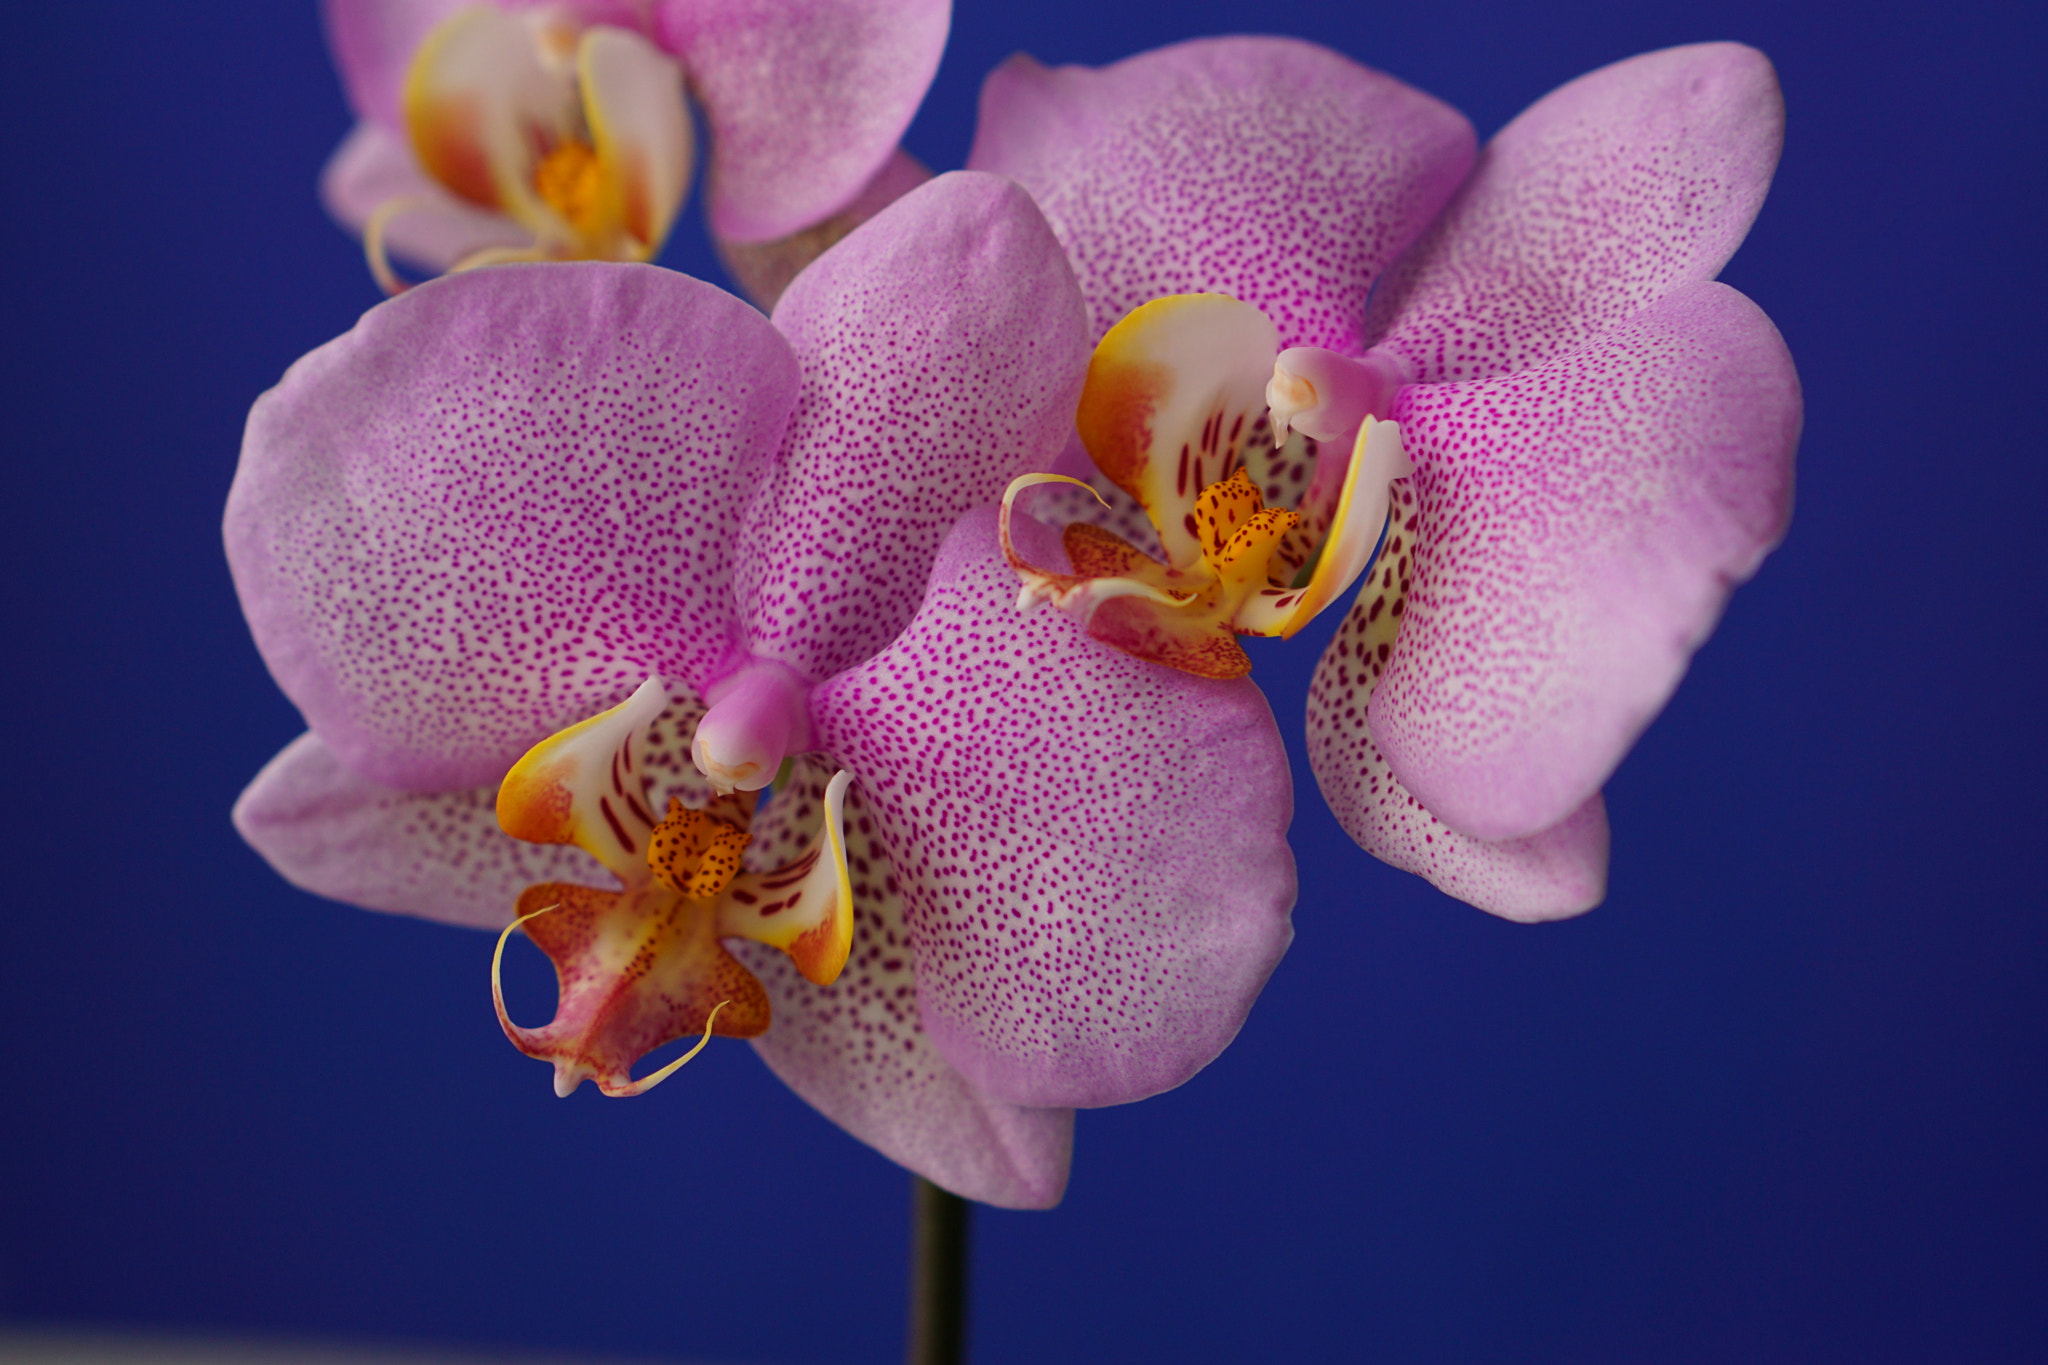 Sony a6000 sample photo. Orchid blossom beautifully patterned photography